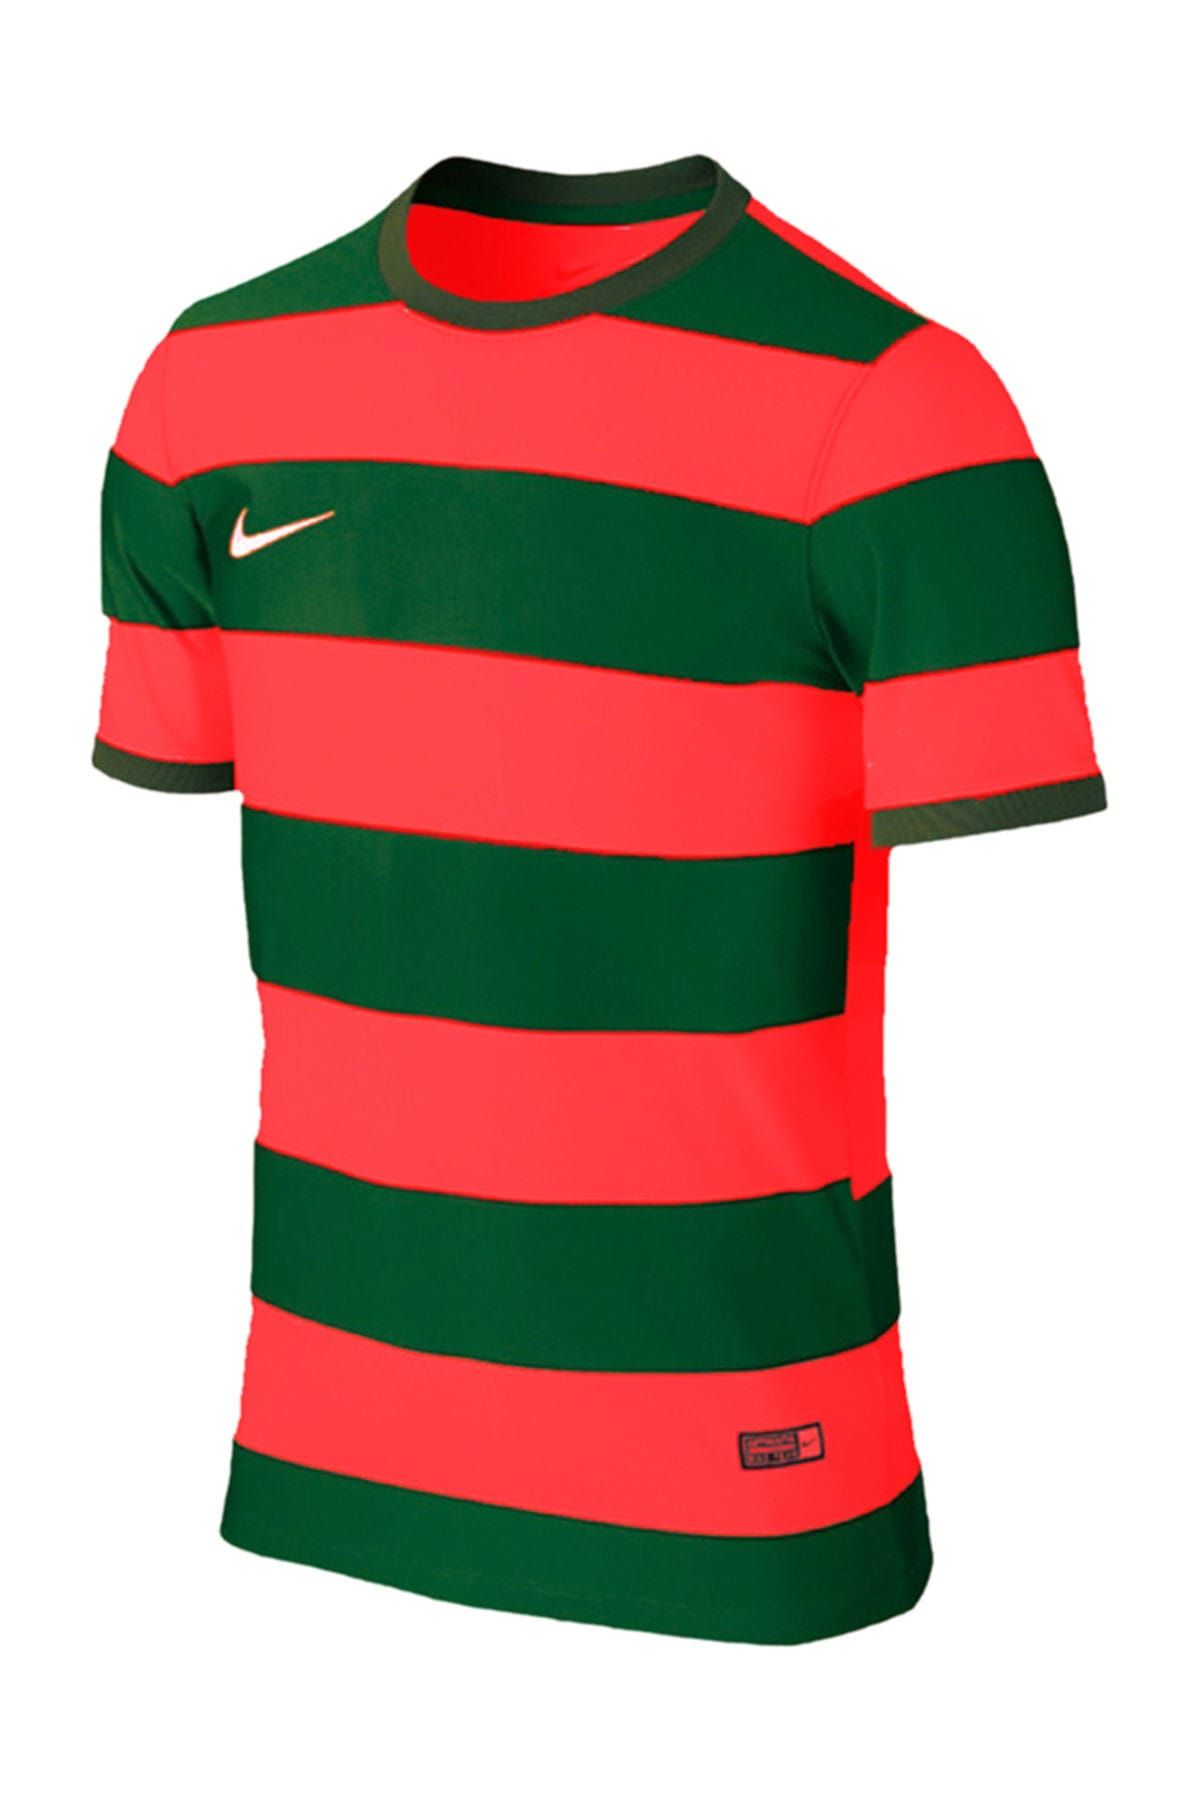 Nike 725888-302 SS Hooped Division Futbol Forma